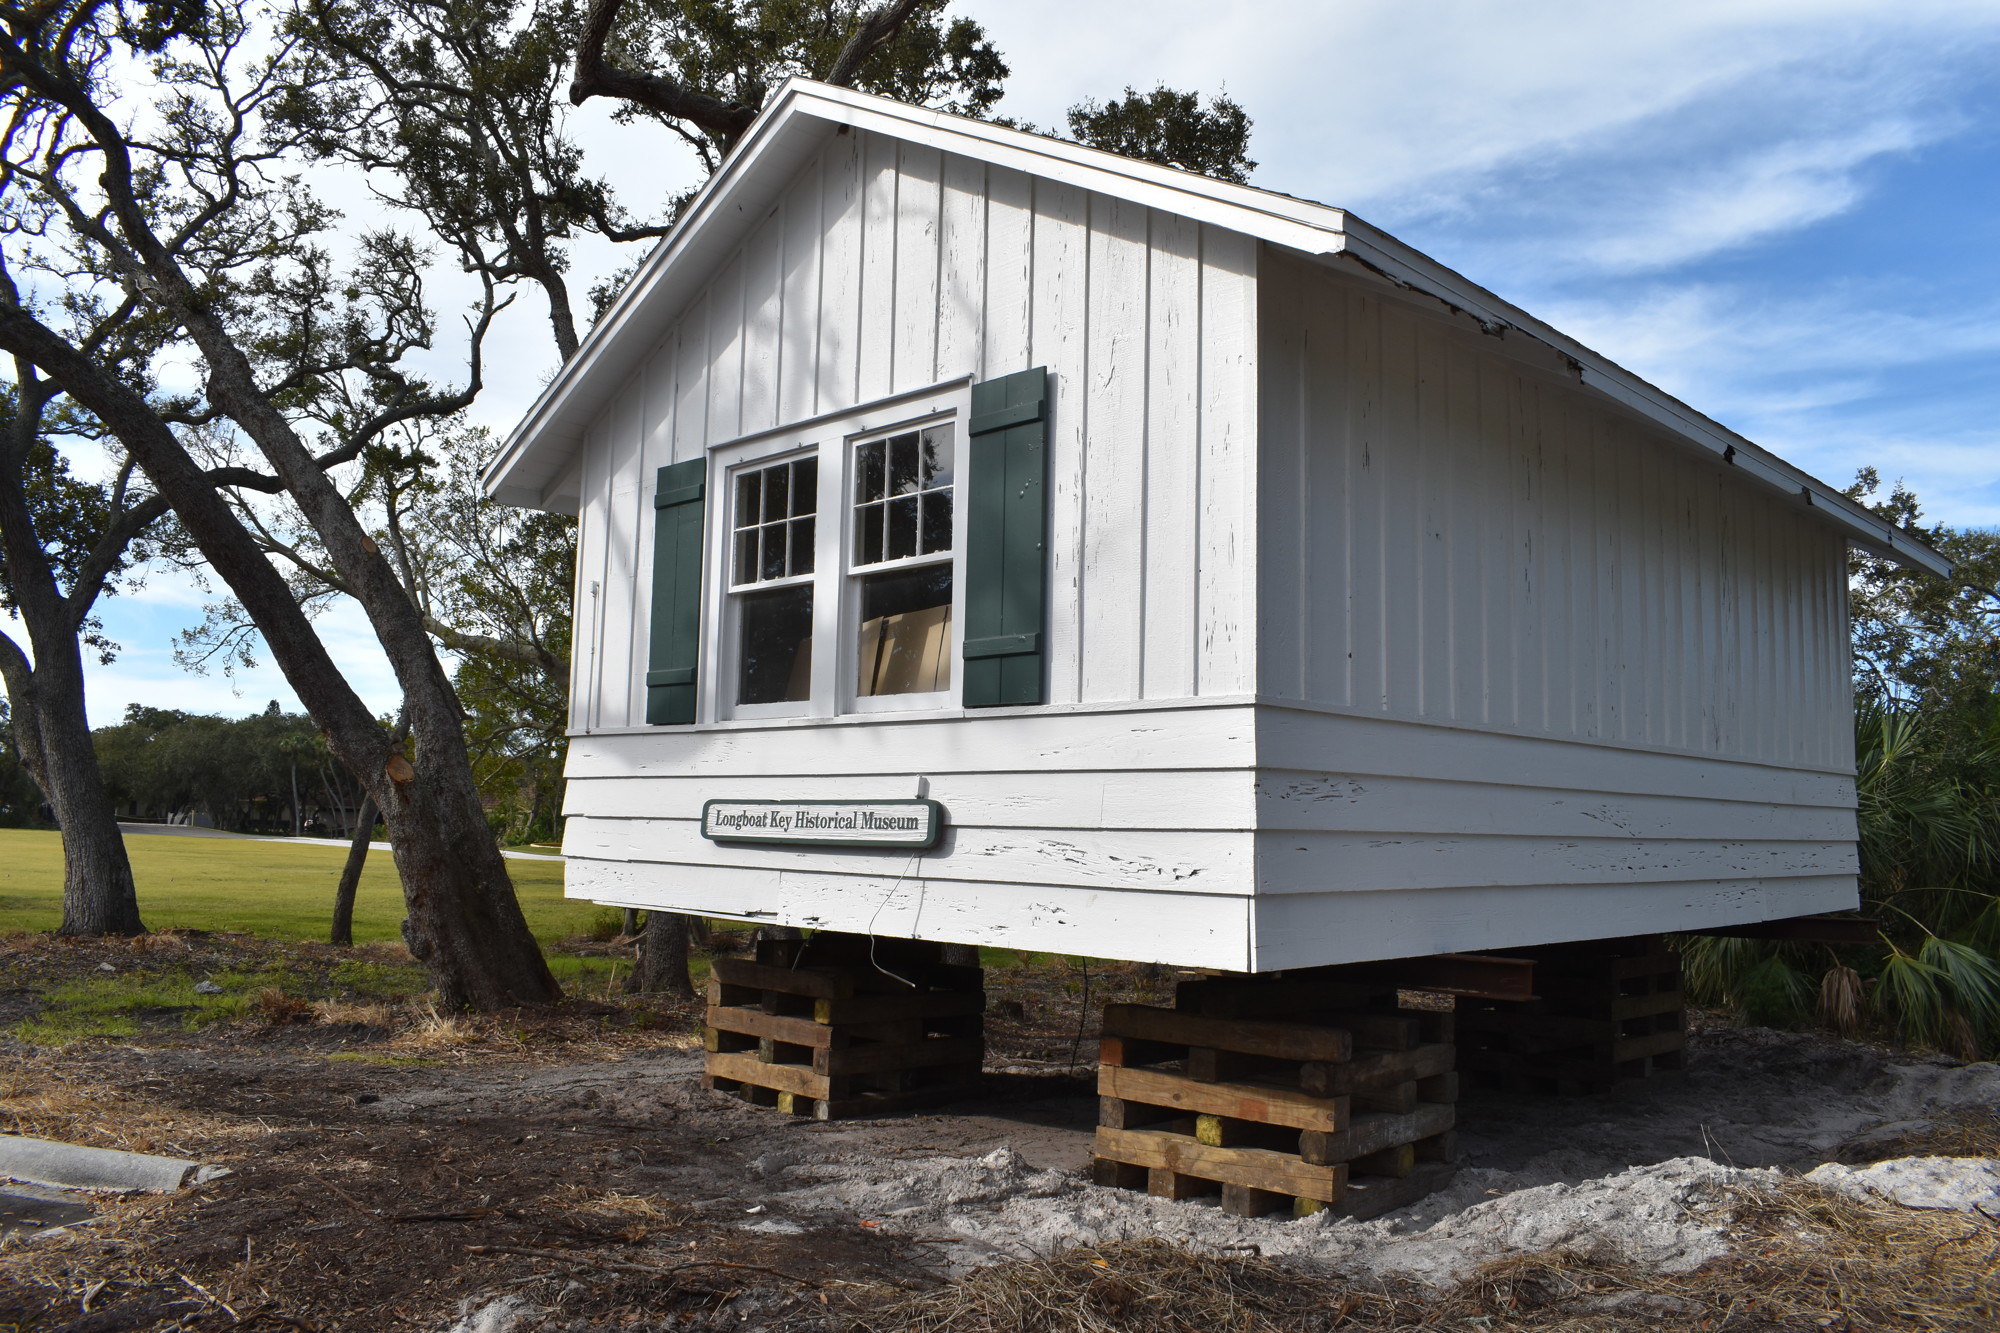 In January, the Longboat Key Historical Society moved its smaller historic cottage to the Town Center site.